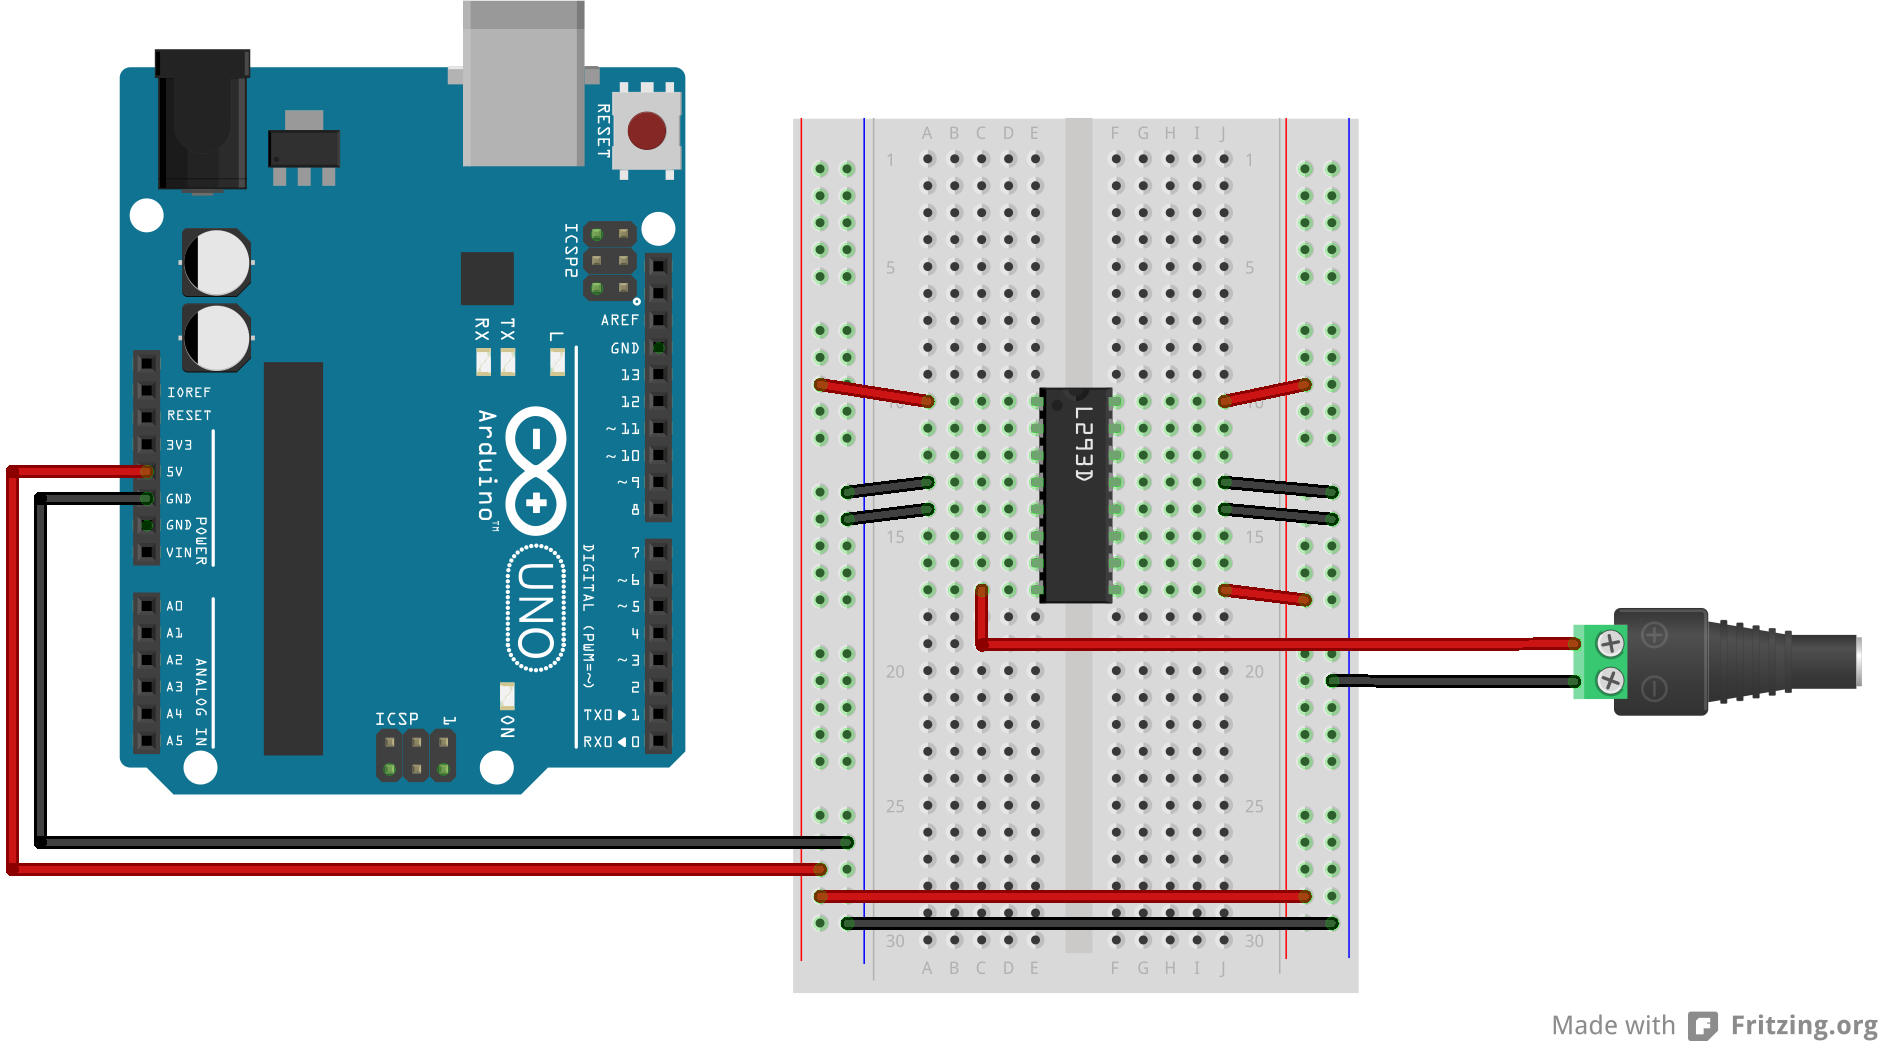 Breadboard view of an h-bridge connected to an Arduino for driving a stepper motor. The Arduino and breadboard are connected as described in the previous breadboard view. The H-bridge straddles the middle of the breadboard in rows 10 through 16. The H-bridge